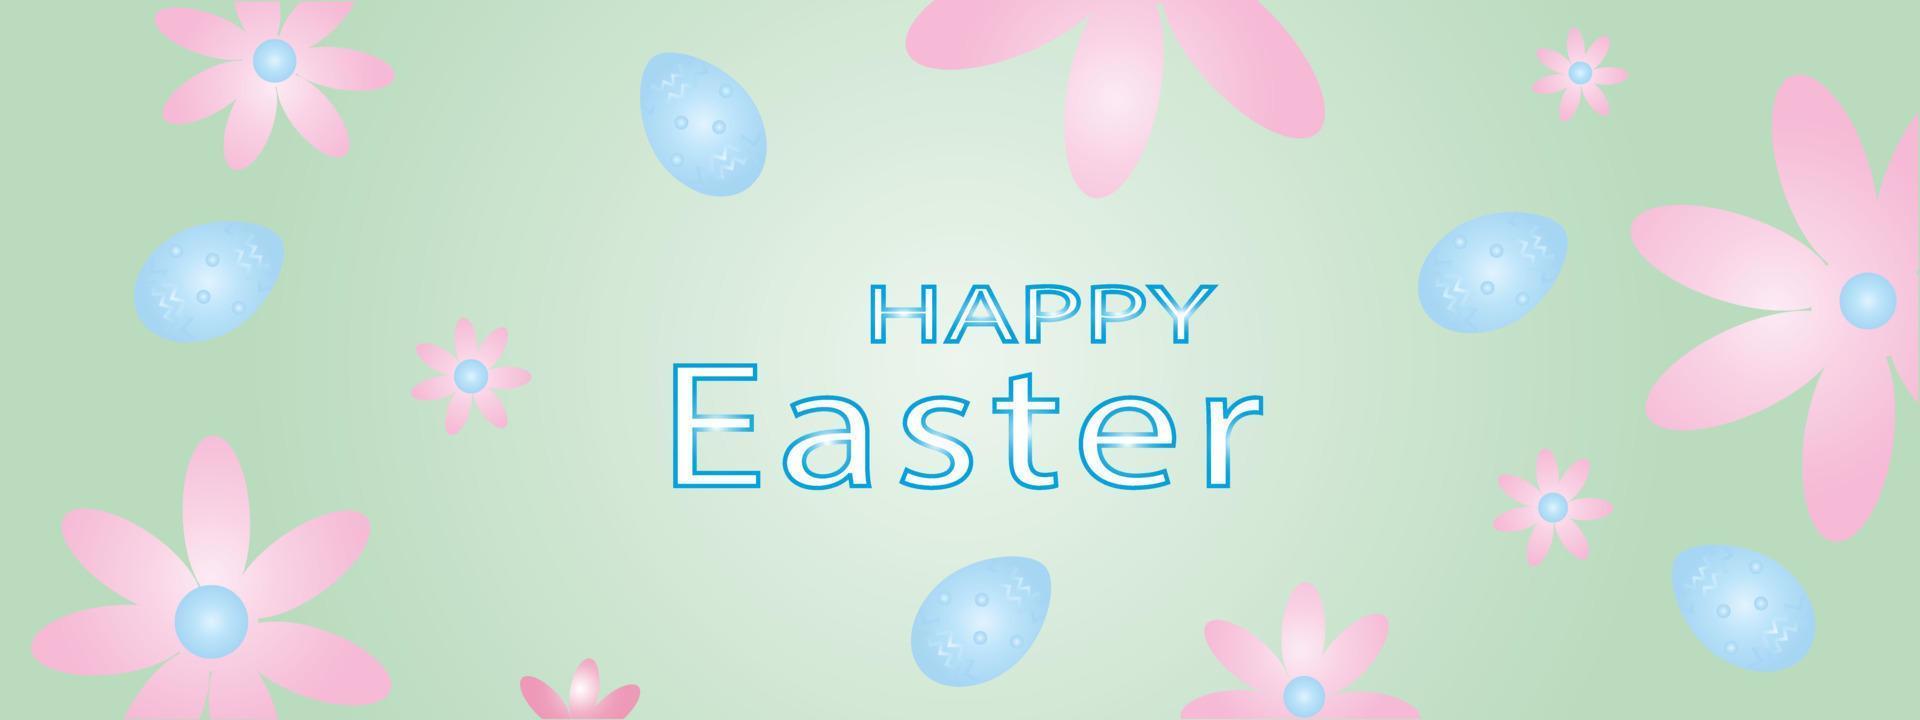 Postcard baner happy easter with bright colored eggs and spring flowers. gentle cute color gradients. Vector EPS10